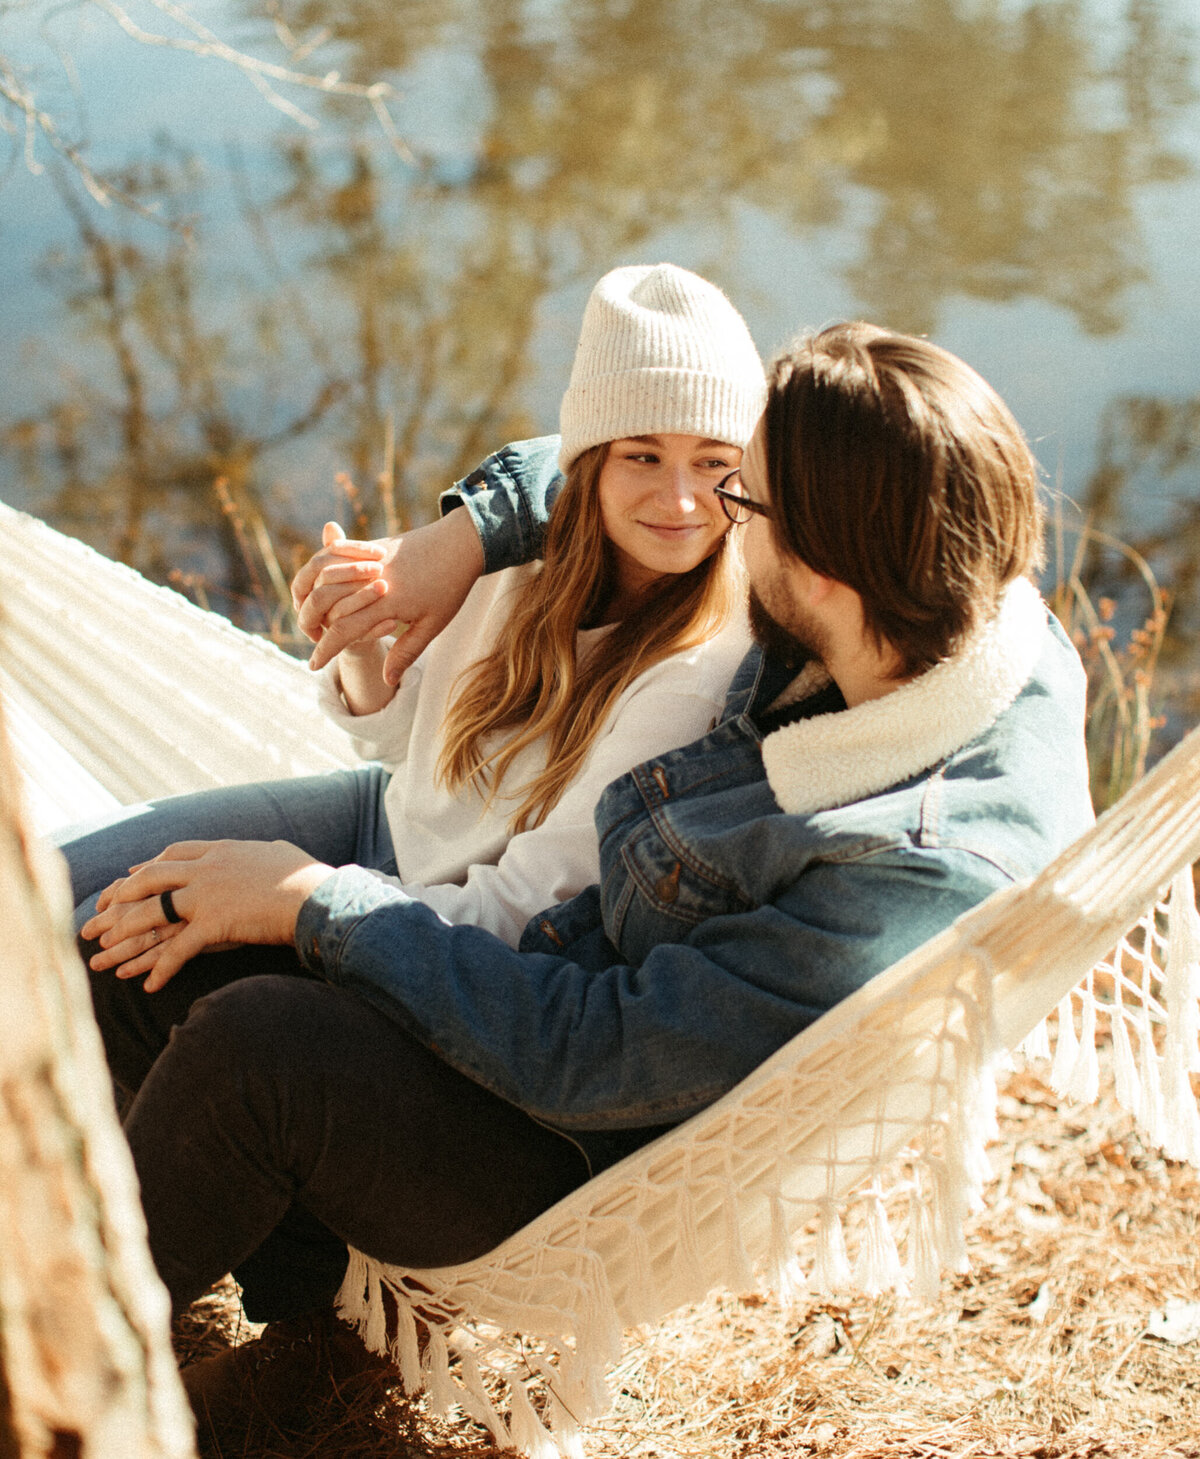 A couple is wearing a winter outfit and sitting in a hammock together with a lake behind them.